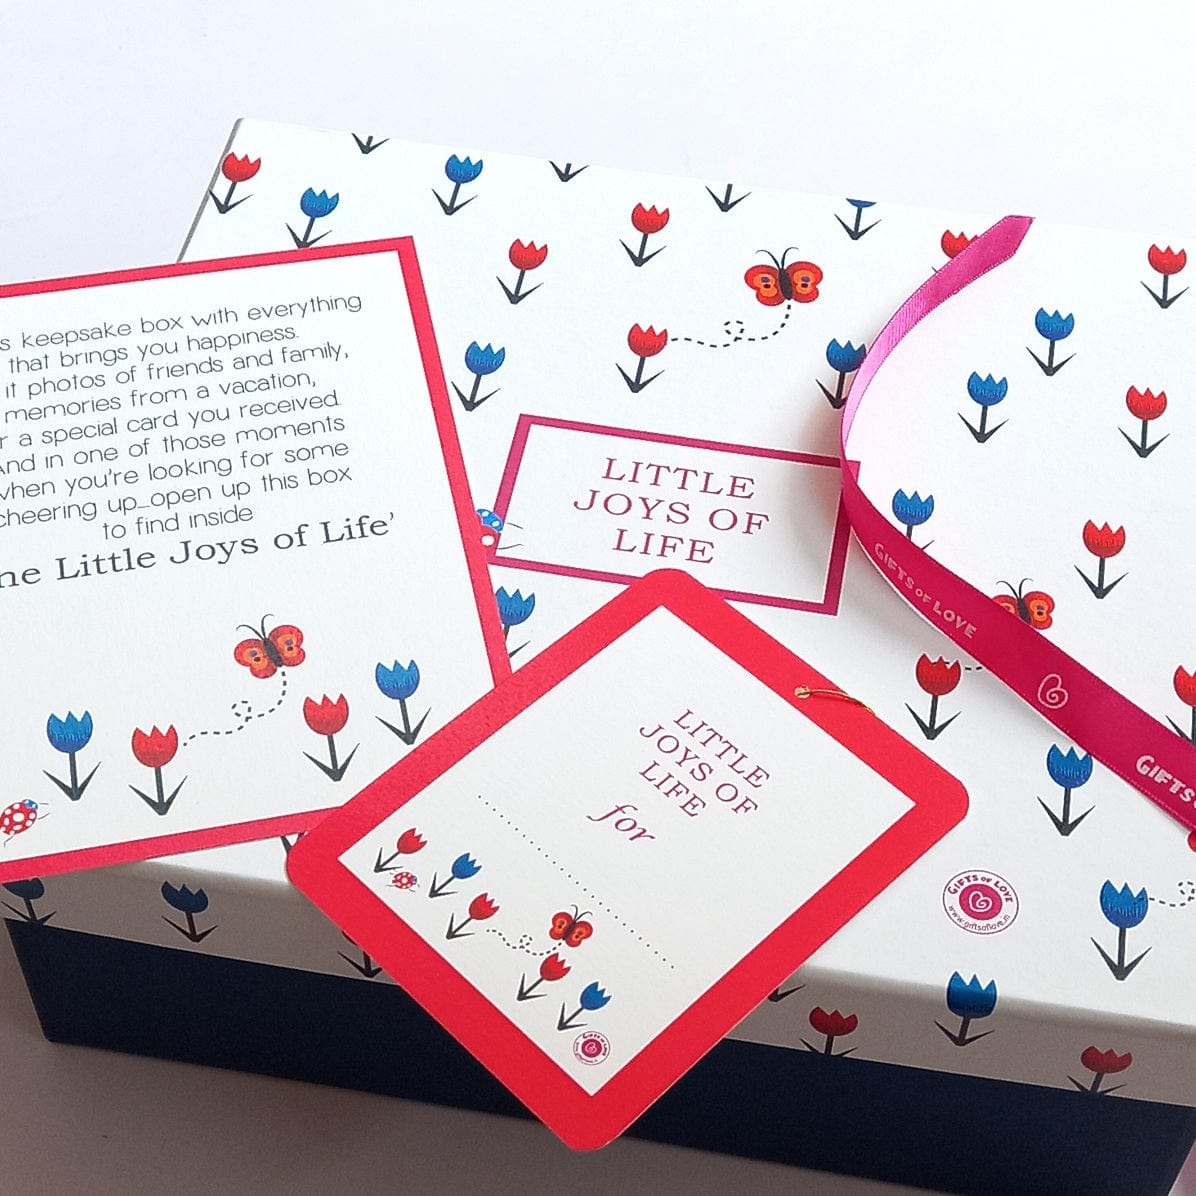 Gifts of Love | Little Joys of Life Boxed Gift